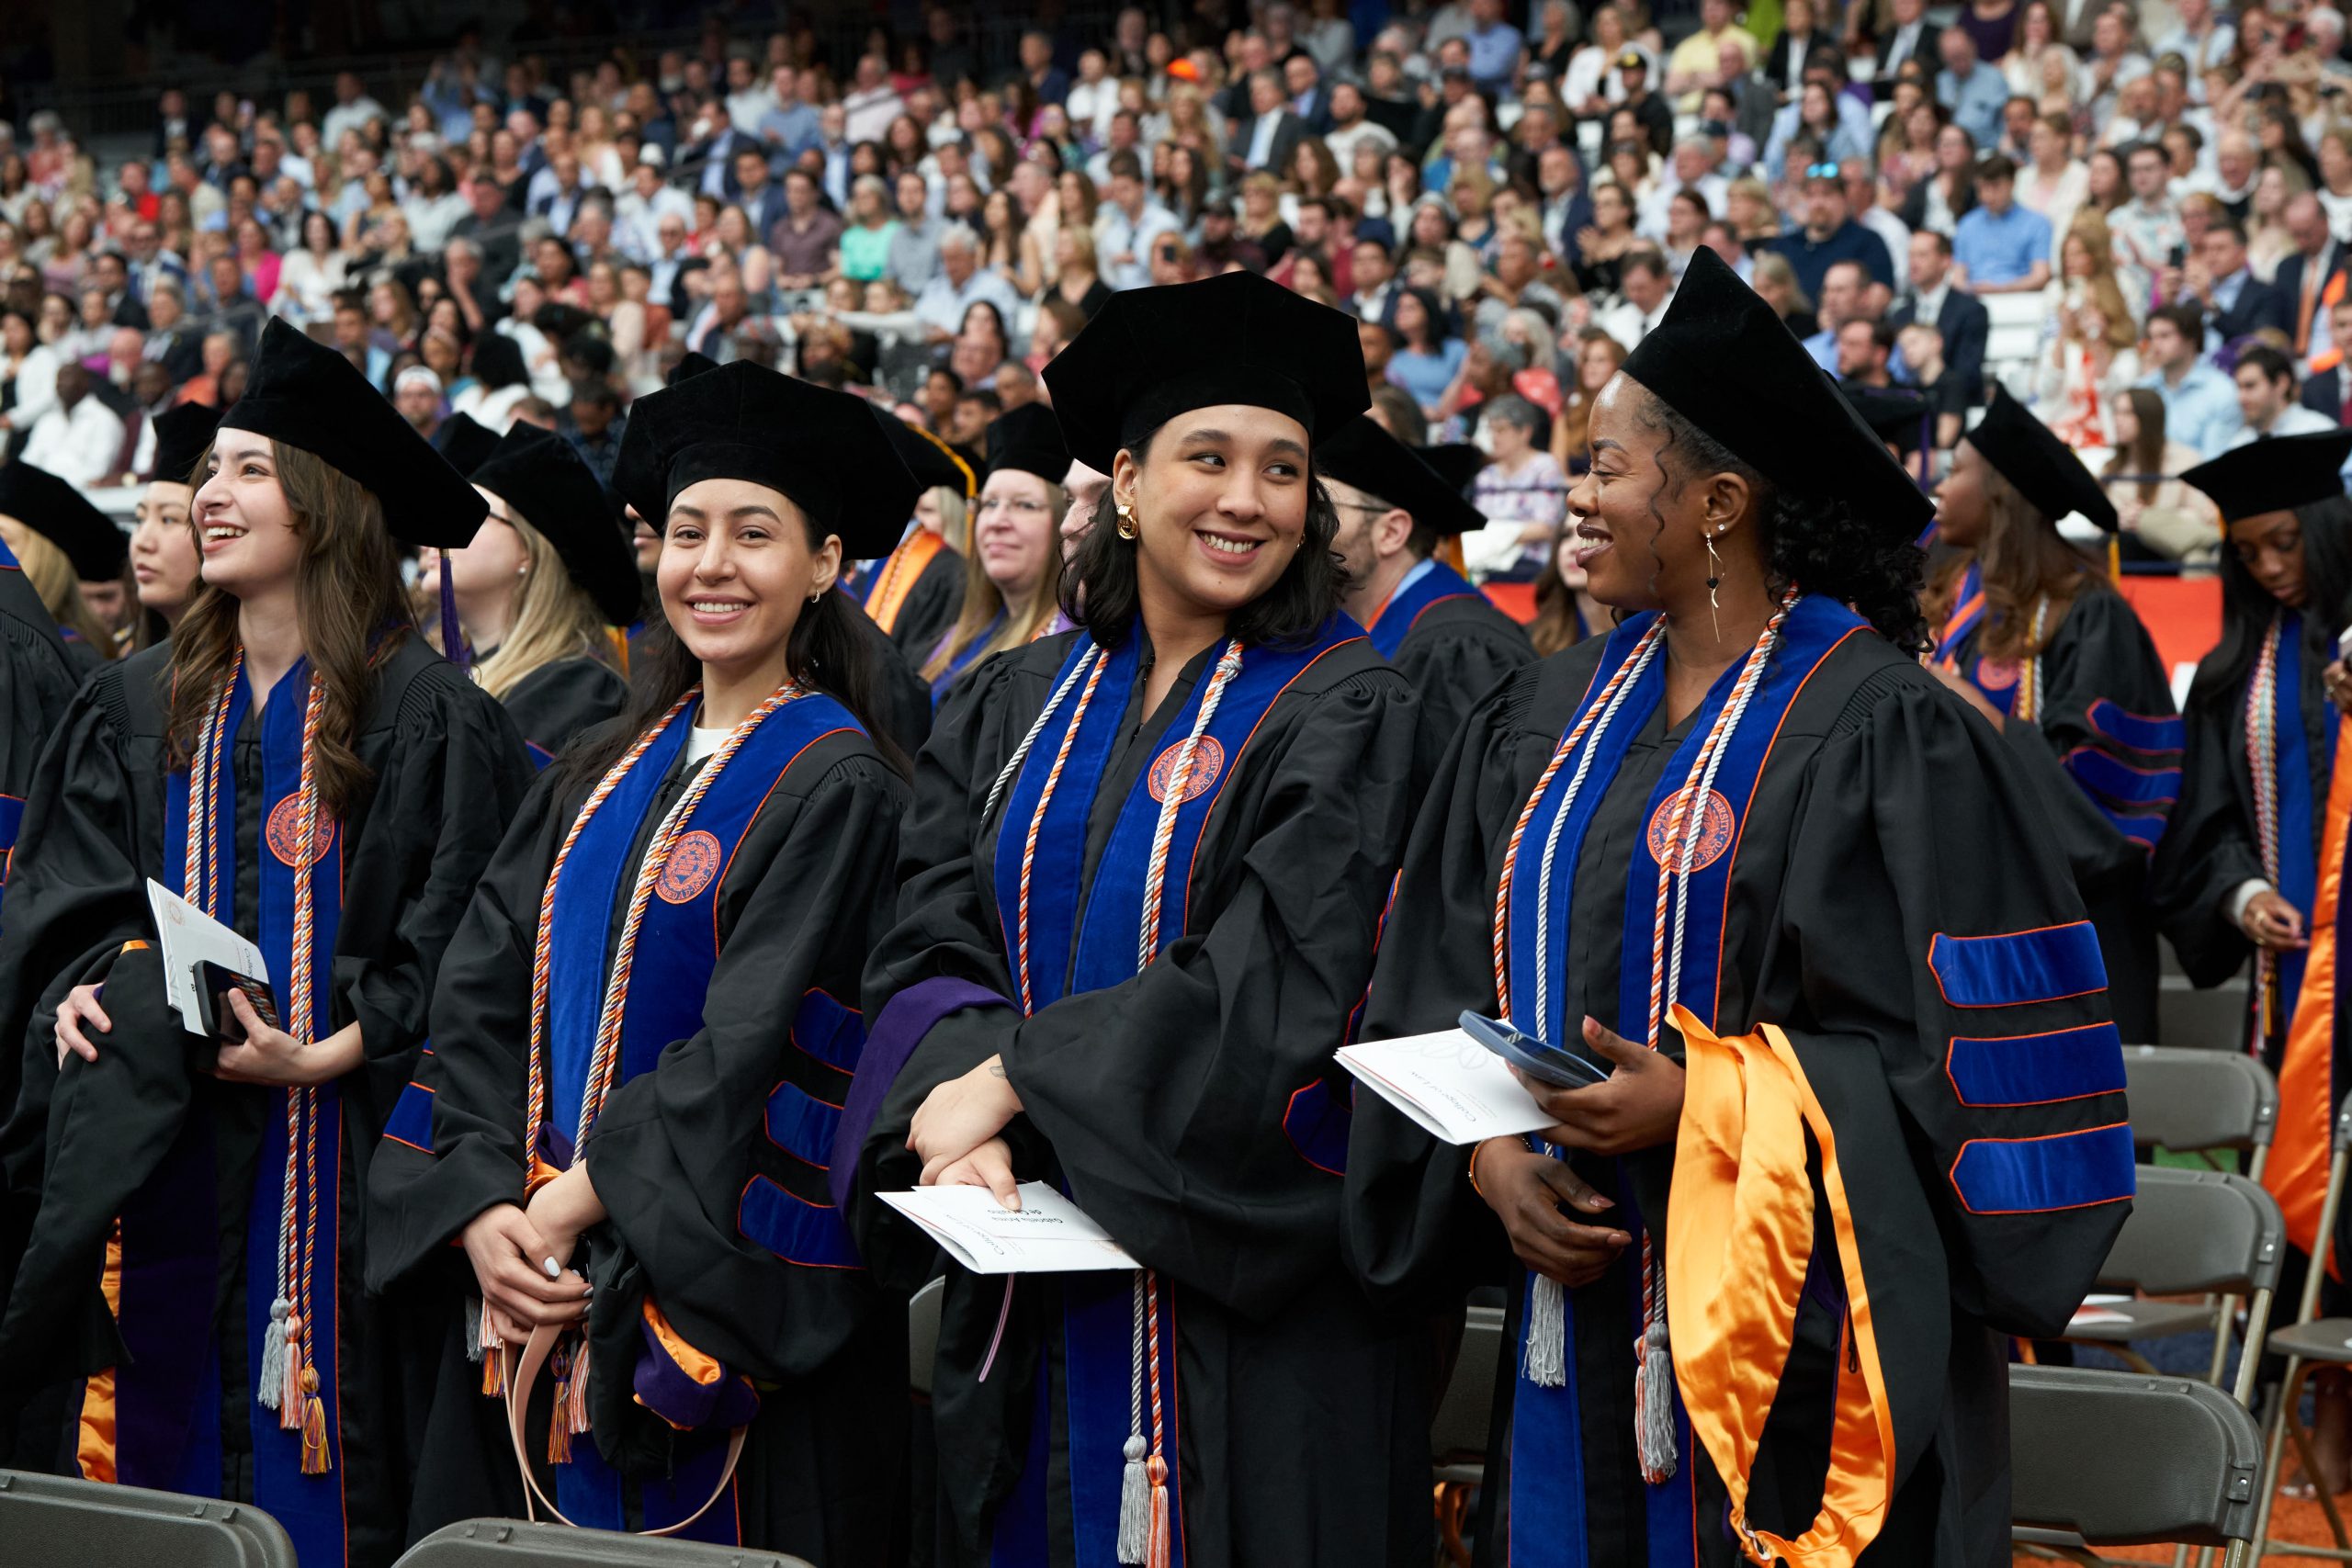 College of law students at commencement in caps and gowns.